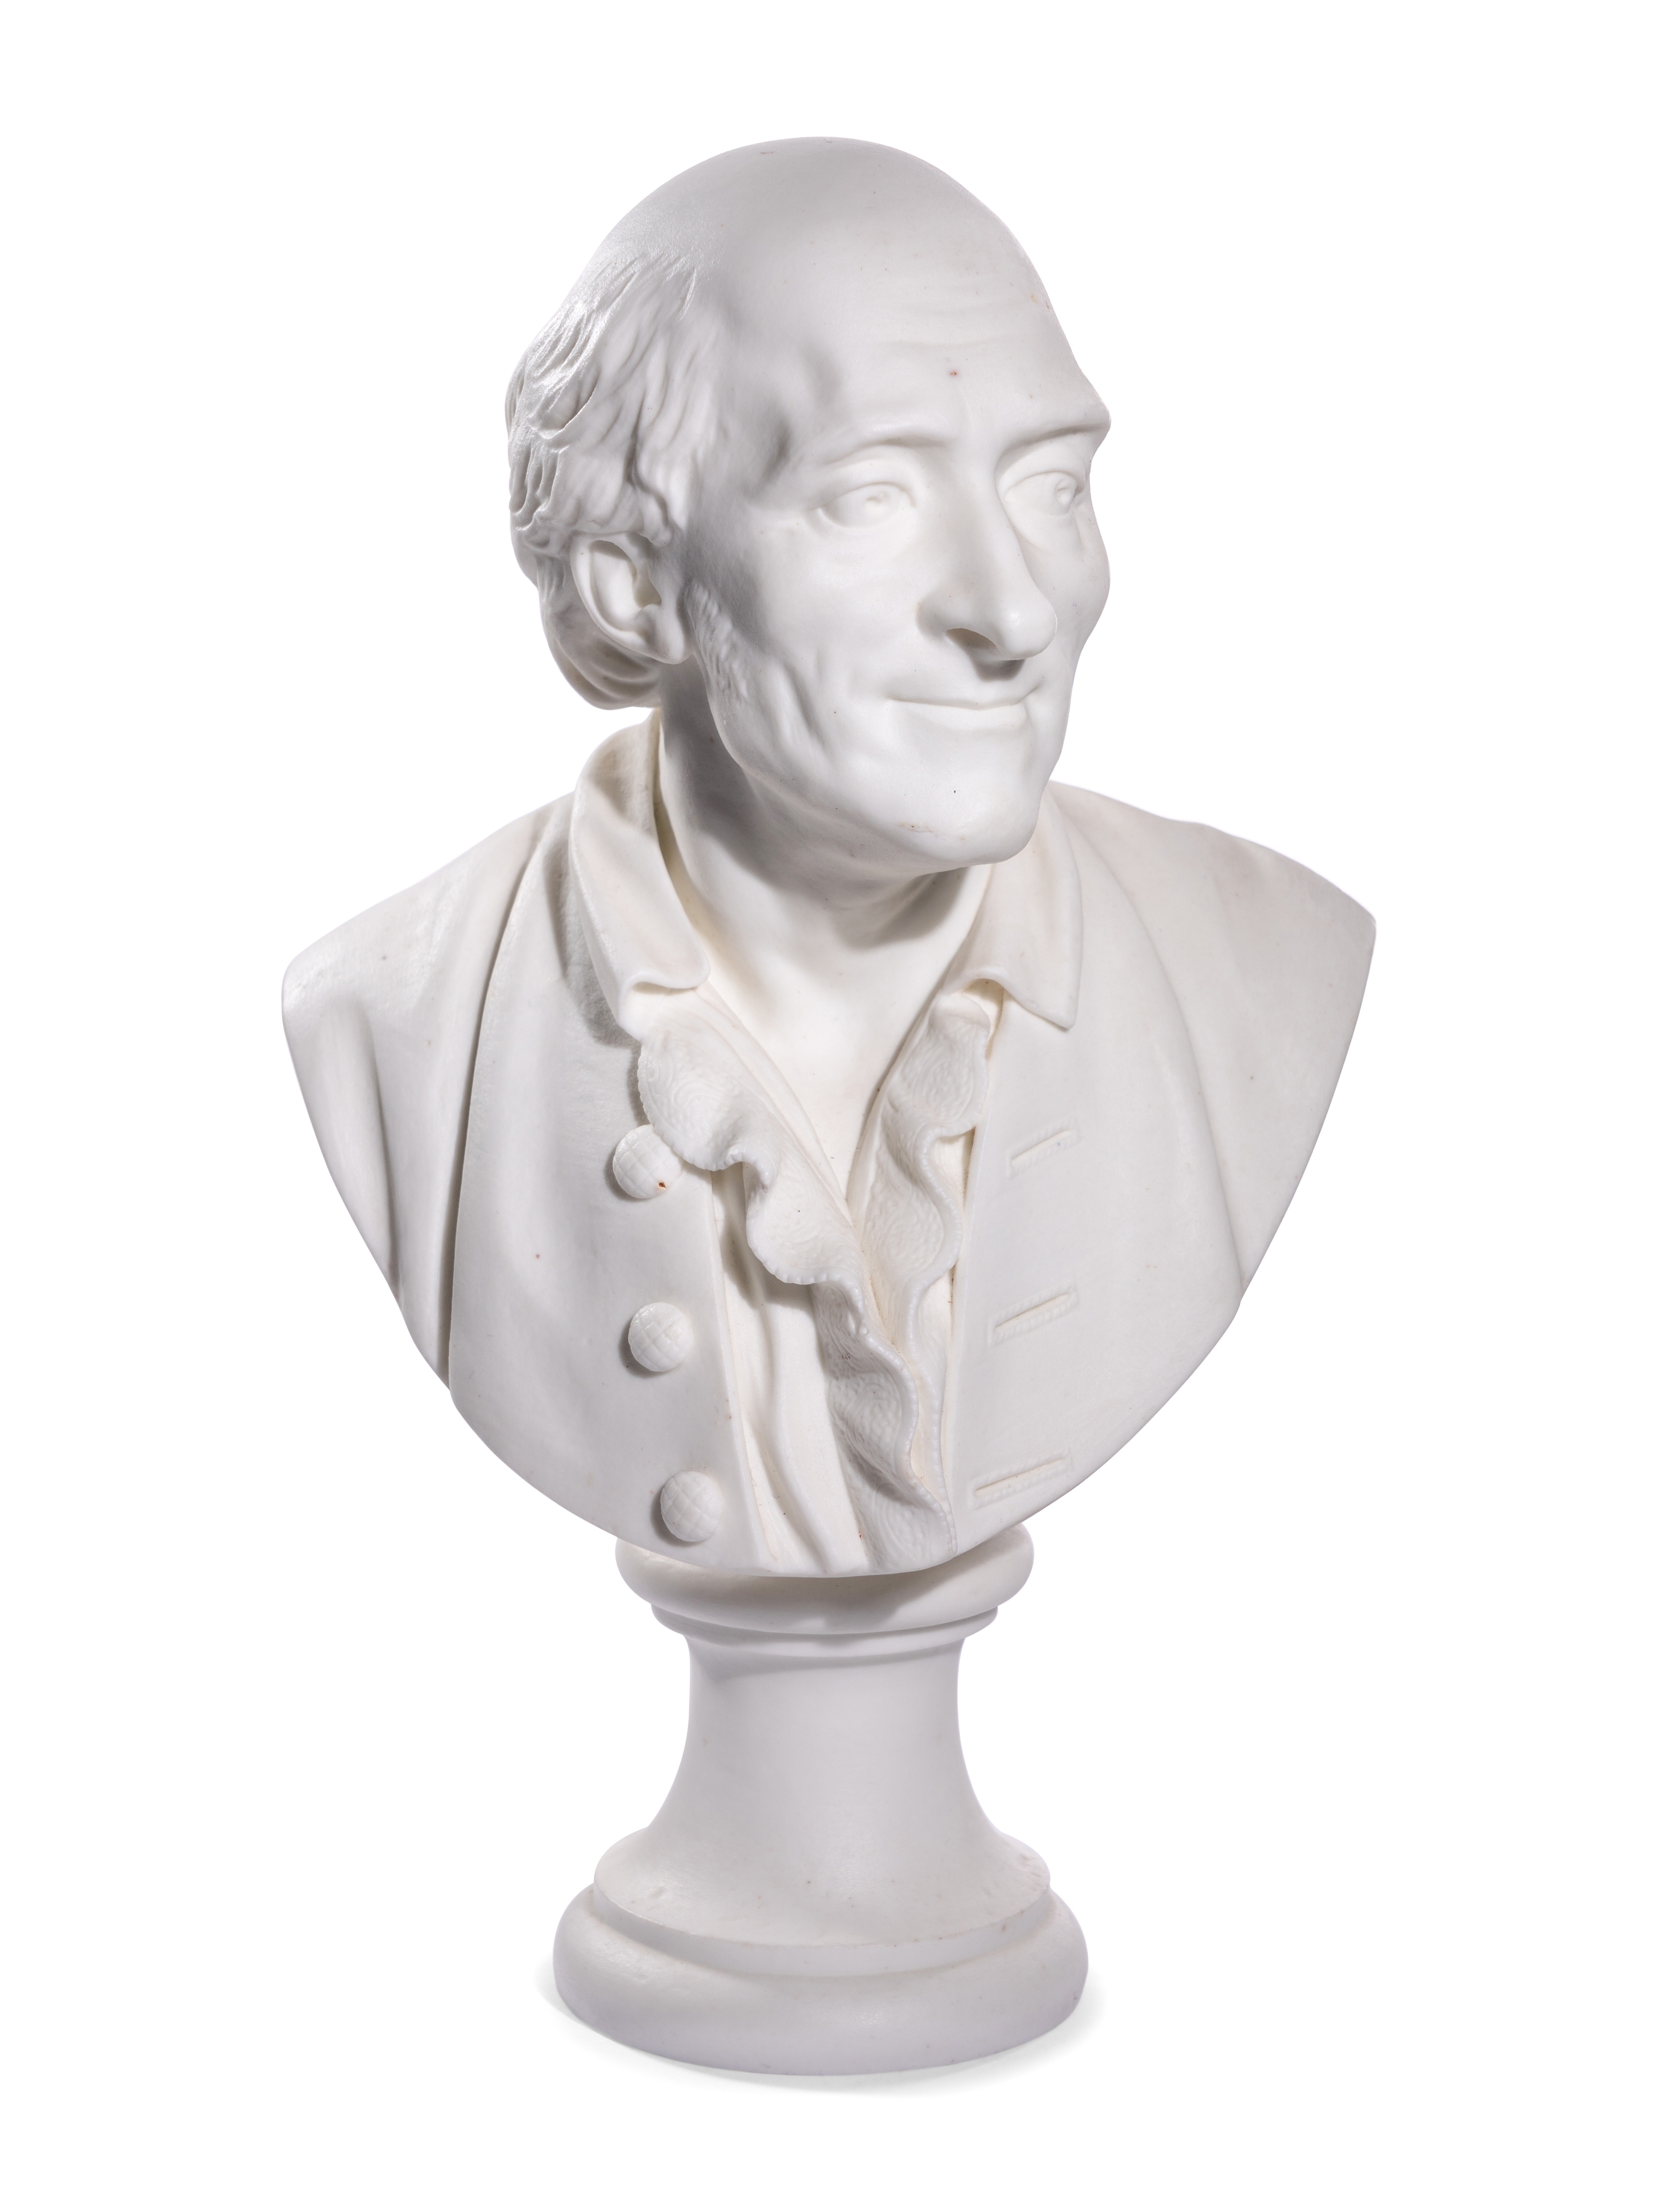 A French Biscuit Porcelain Bust of Fran'cois-Marie Arouet, Called Voltaire - Image 3 of 20